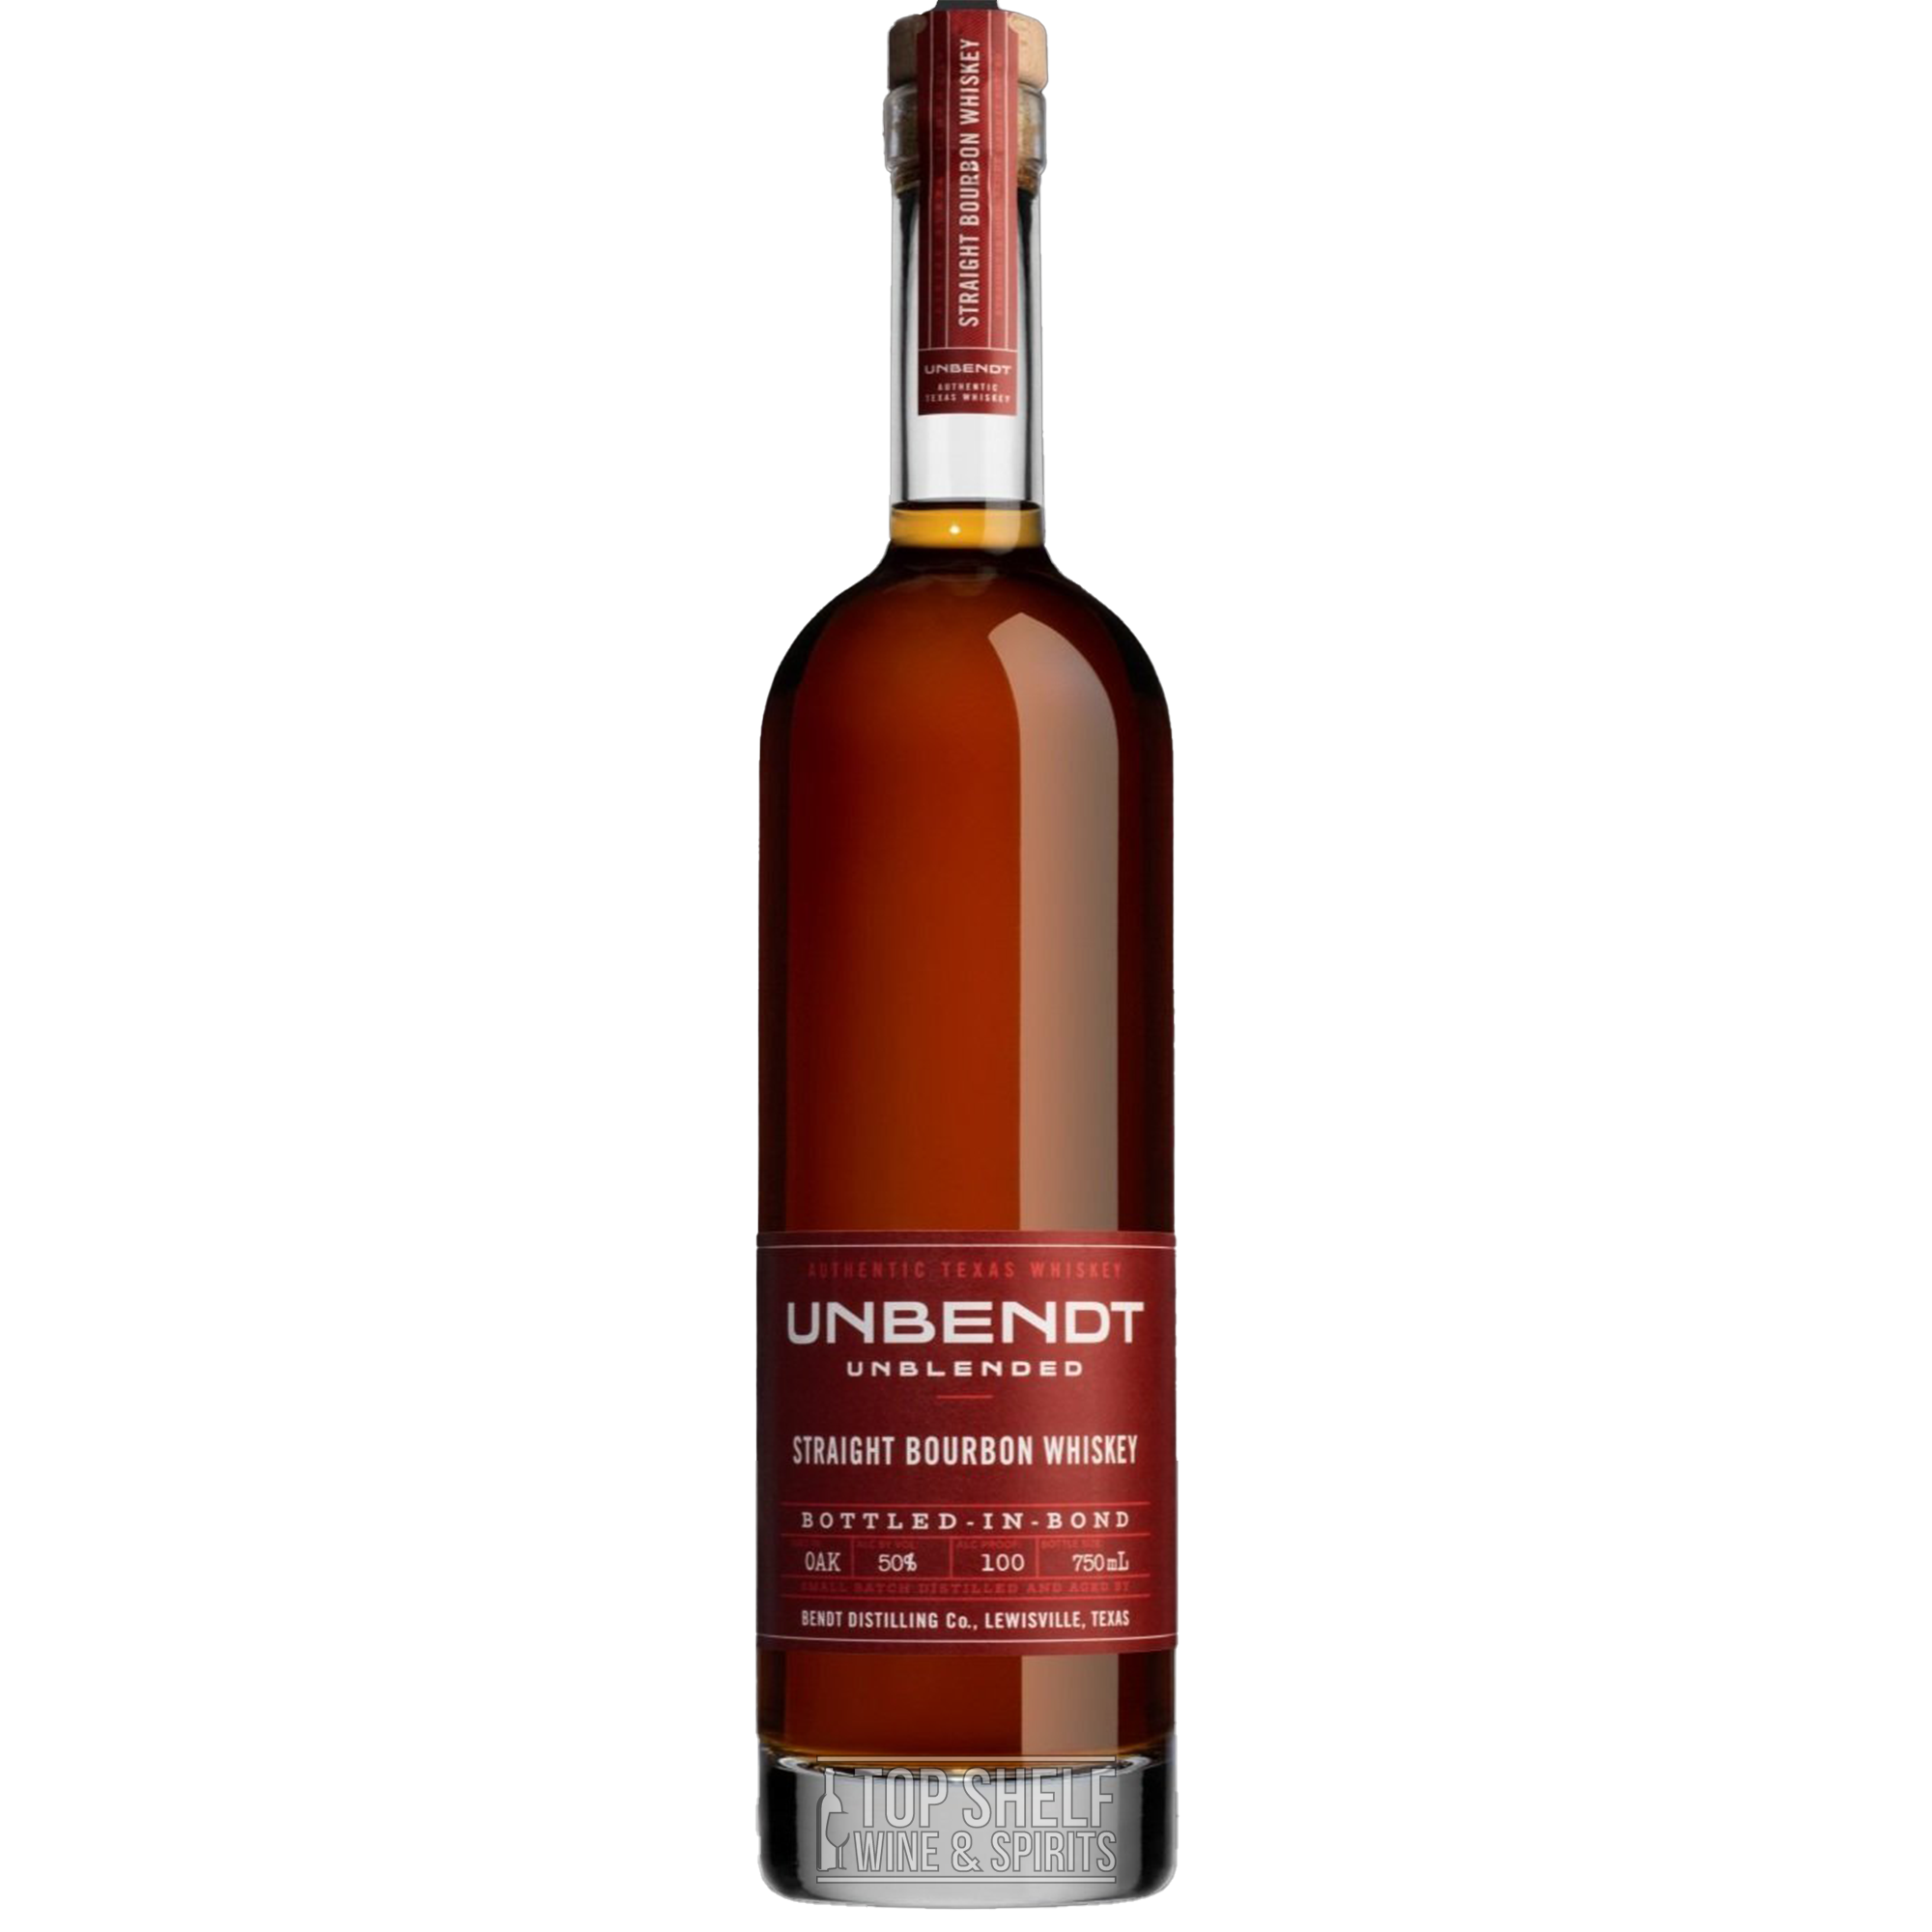 Unbendt Unblended Straight Bourbon Whiskey